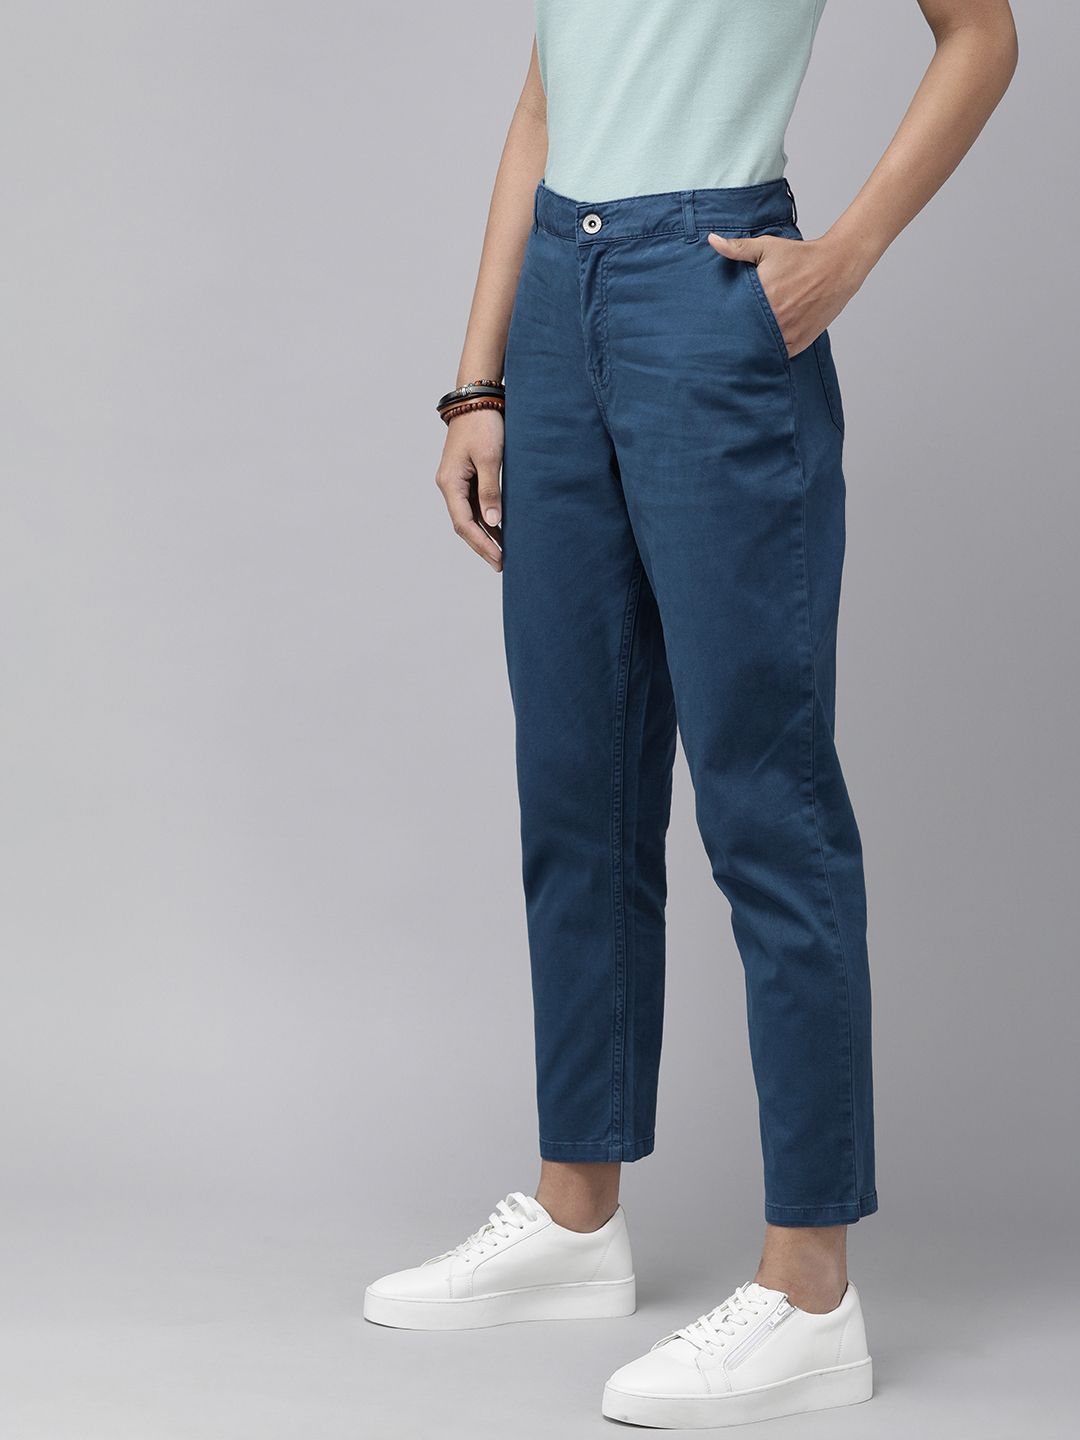 The Roadster Lifestyle Co Women Blue Solid Chinos Trousers Price in India